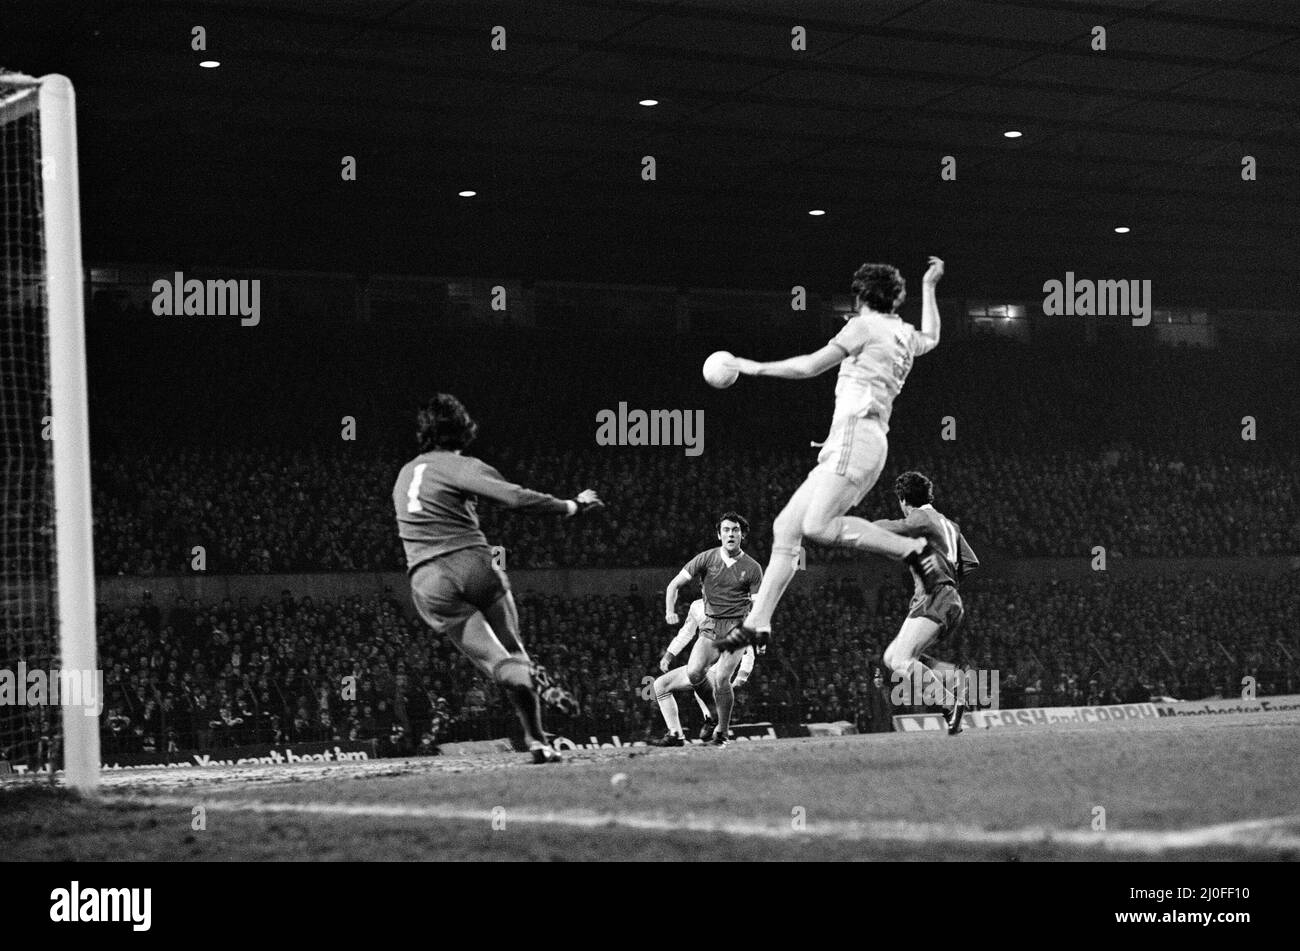 The 1978 Football League Cup Final was the eighteenth League Cup final, and was contested between Liverpool and Nottingham Forest. The initial match resulted in a 0?0 draw at Wembley Stadium on 18 March 1978. The replay was four days later at Old Trafford, and saw John Robertson score from the penalty spot after a foul by Phil Thompson on John O'Hare, which TV replays confirmed was actually outside the penalty area.(Picture) Tony Woodcock has an effort on the Liverpool goal. 22nd March 1978 Stock Photo